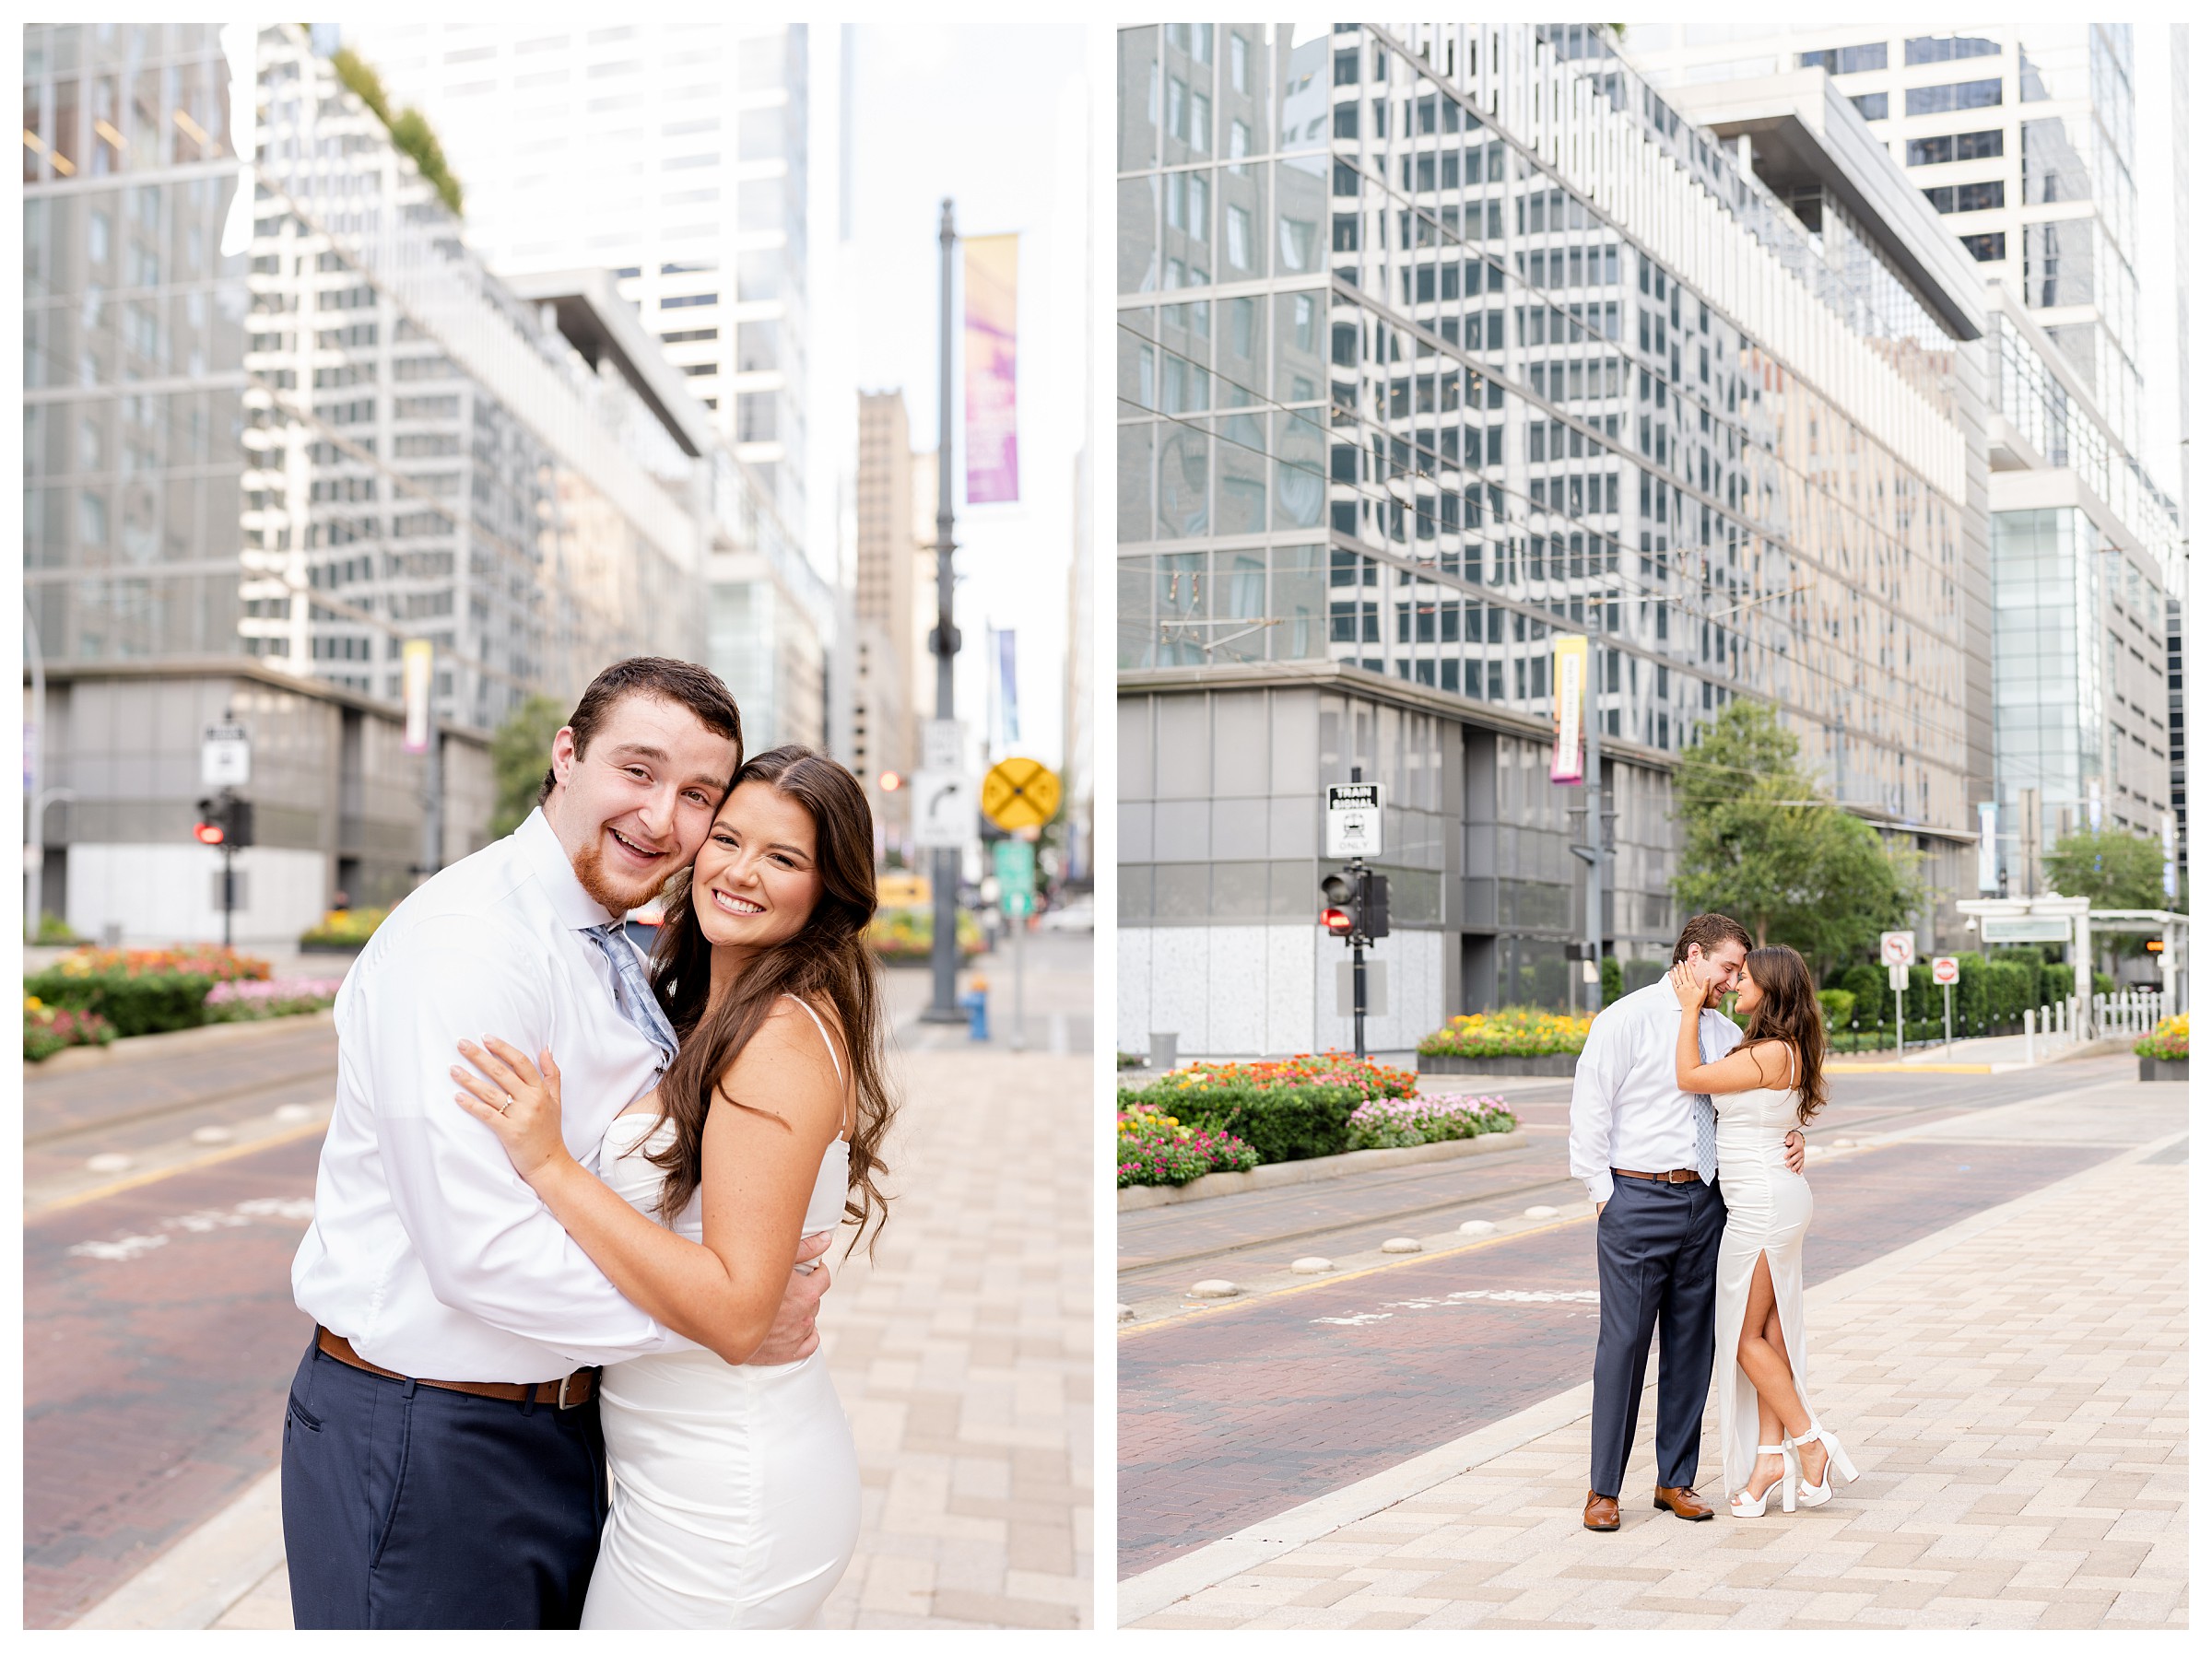 Couple in Downtown Houston - the first image is the couple hugging each other and smiling and the second image is the a pulled back shot of the couple facing each other and forehead to forehead with Downtown behind them.